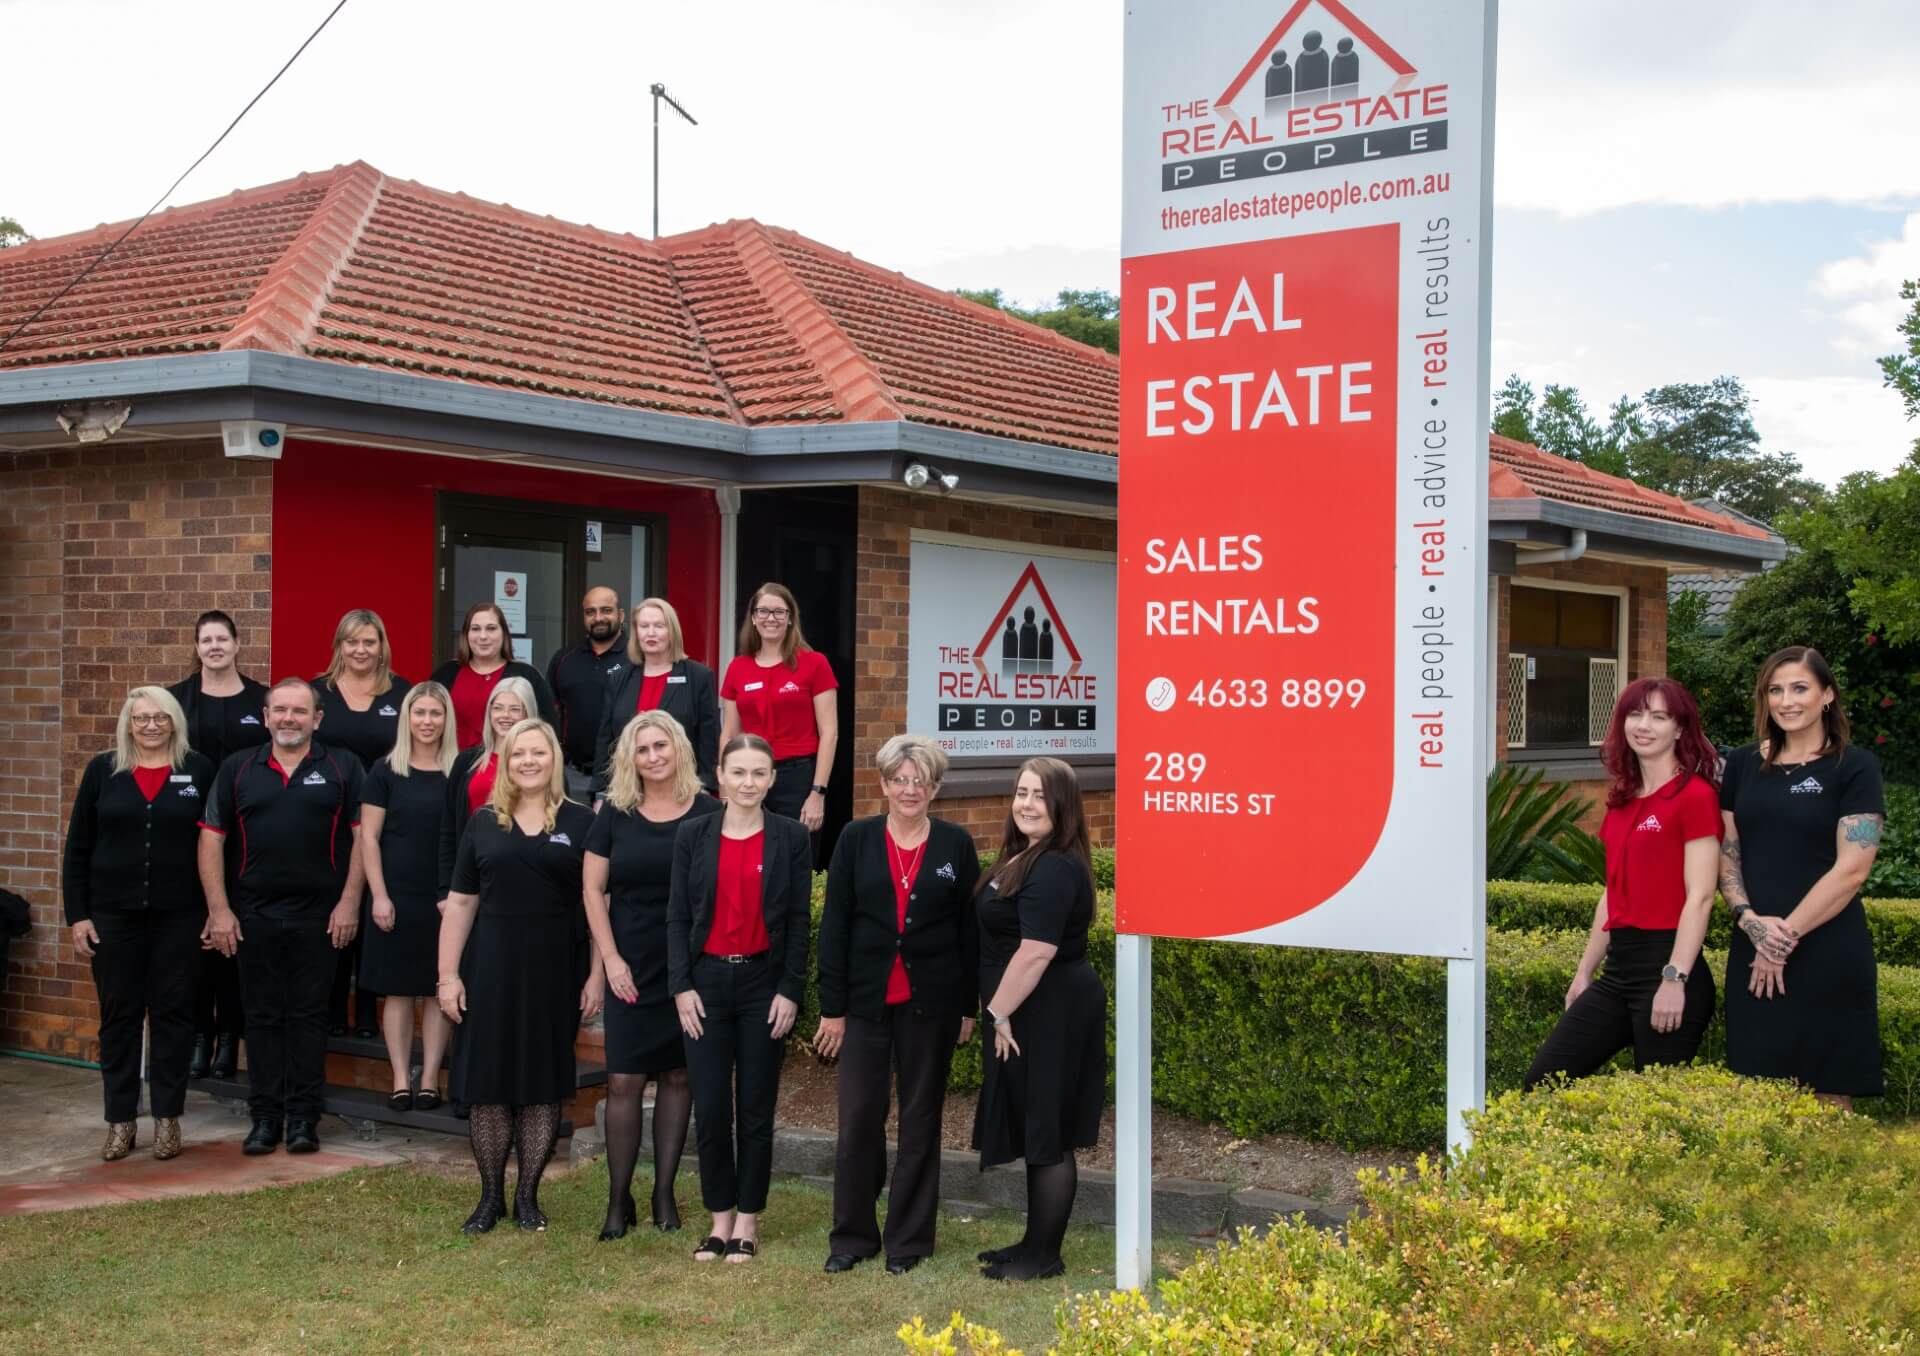 The Real Estate People Full Team